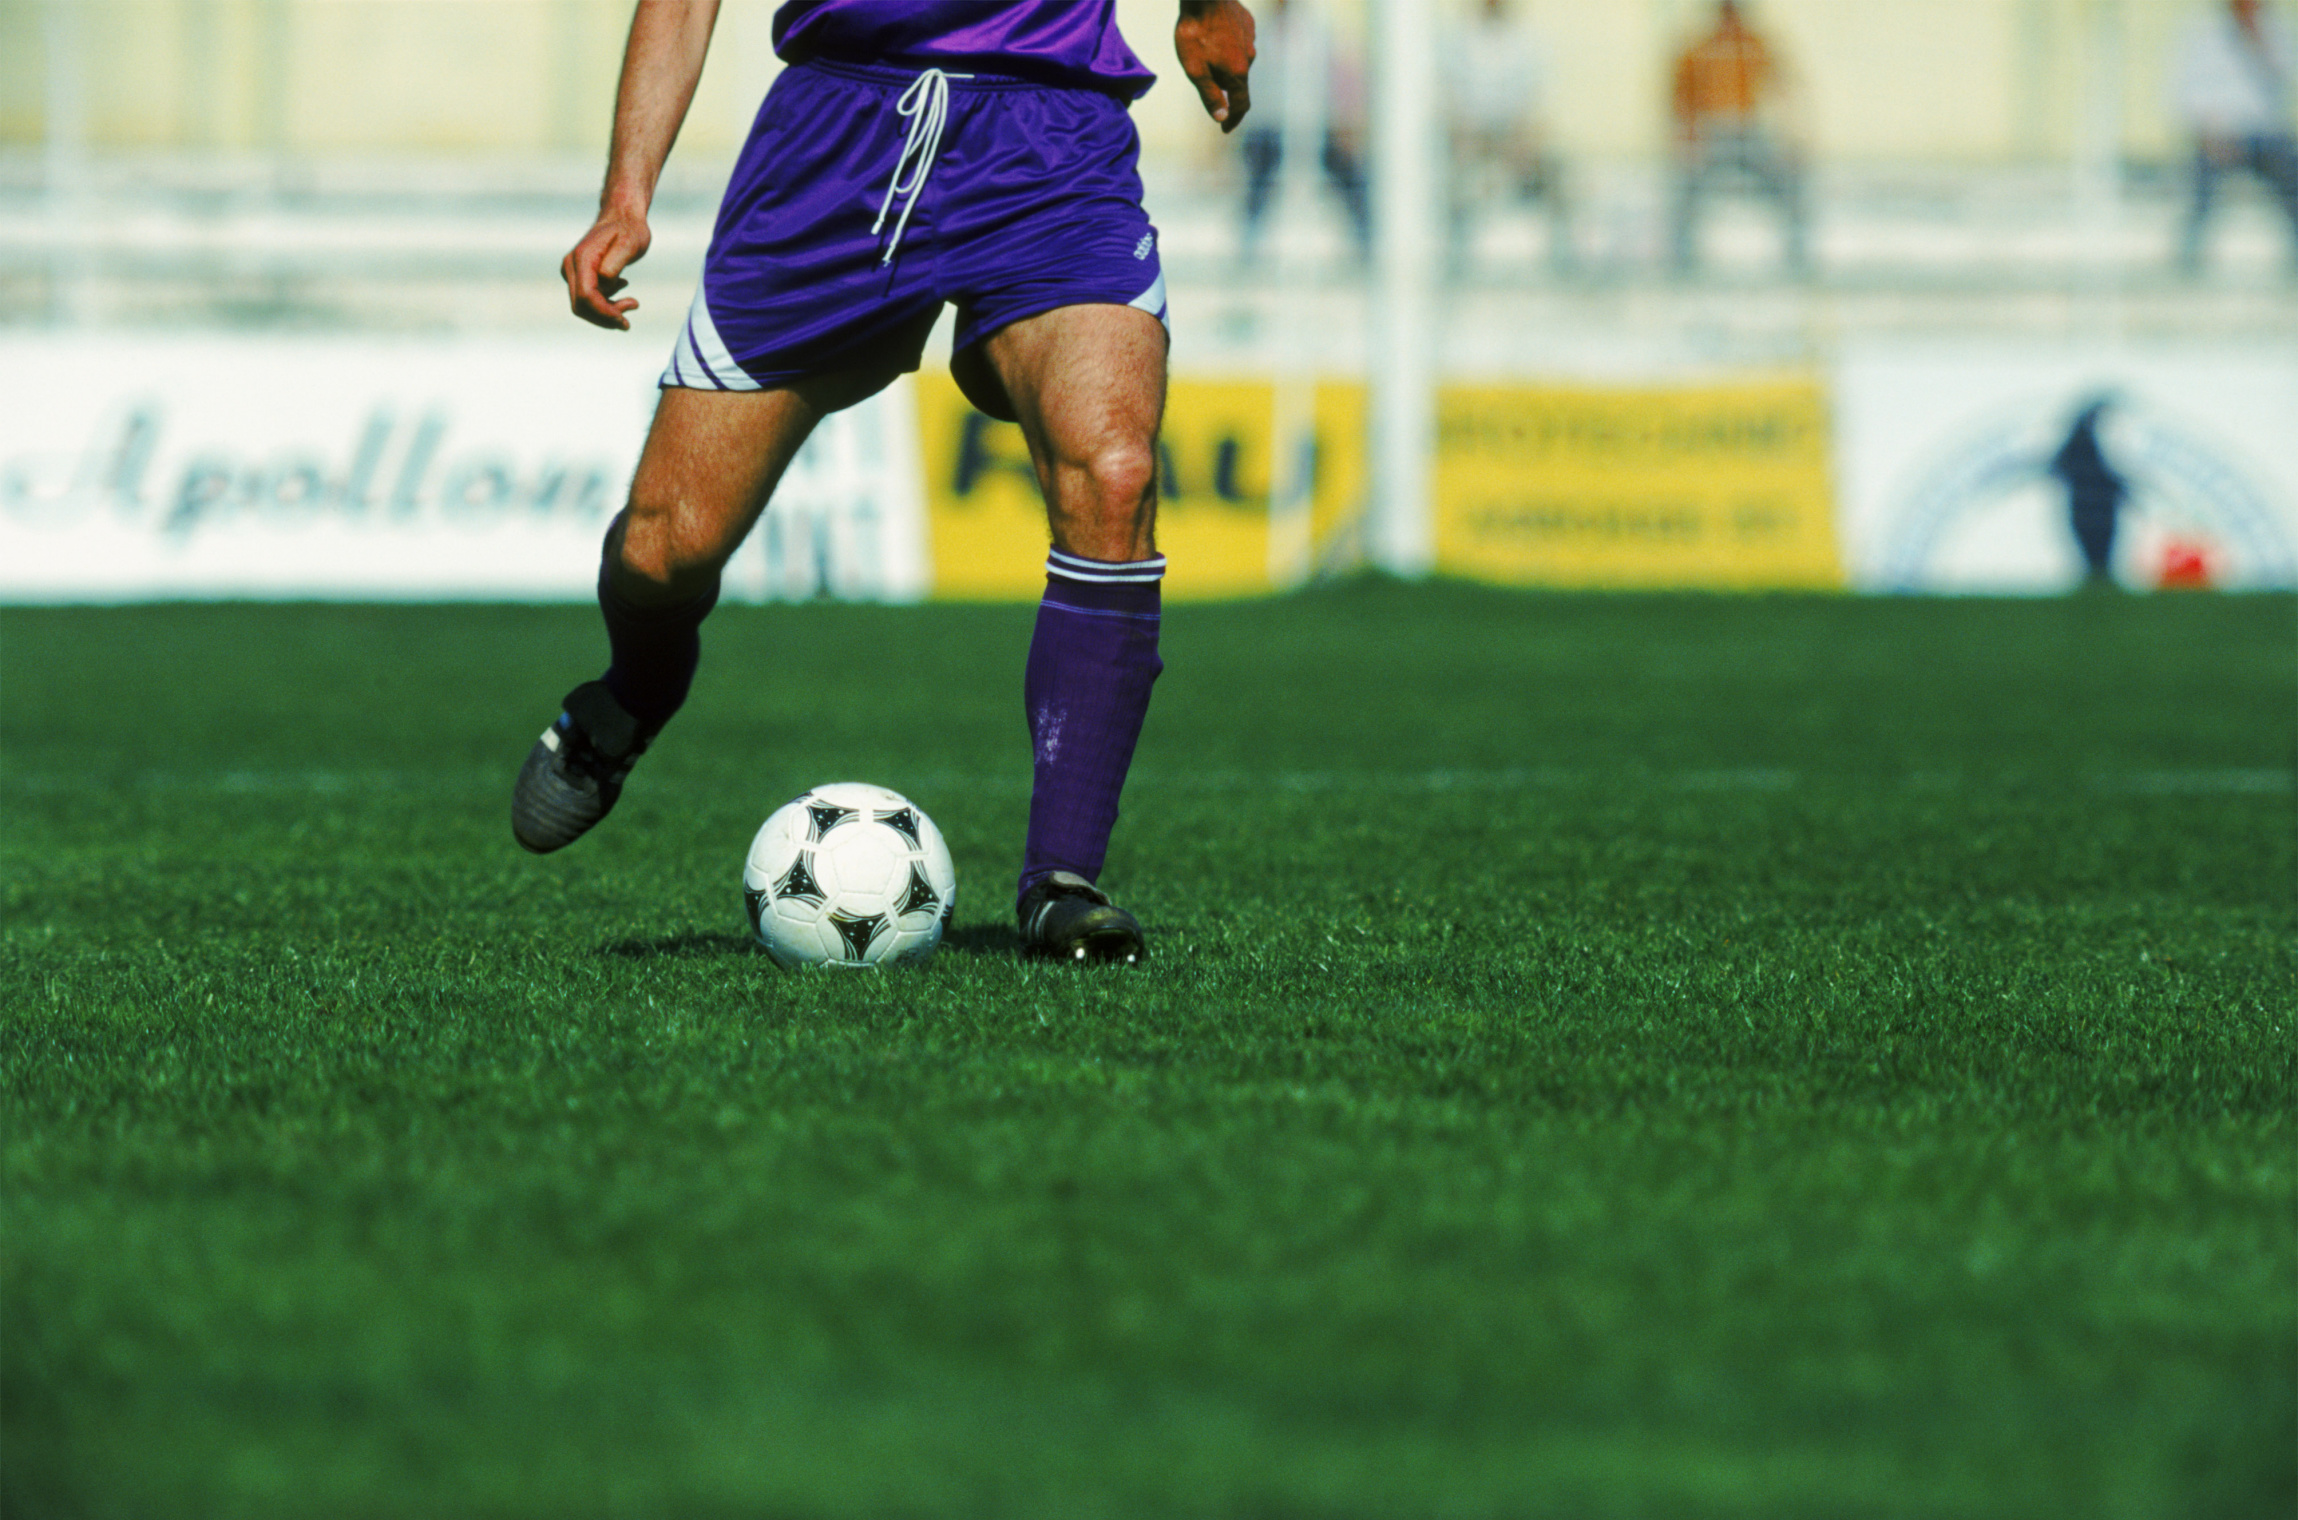 Football player on artificial turf